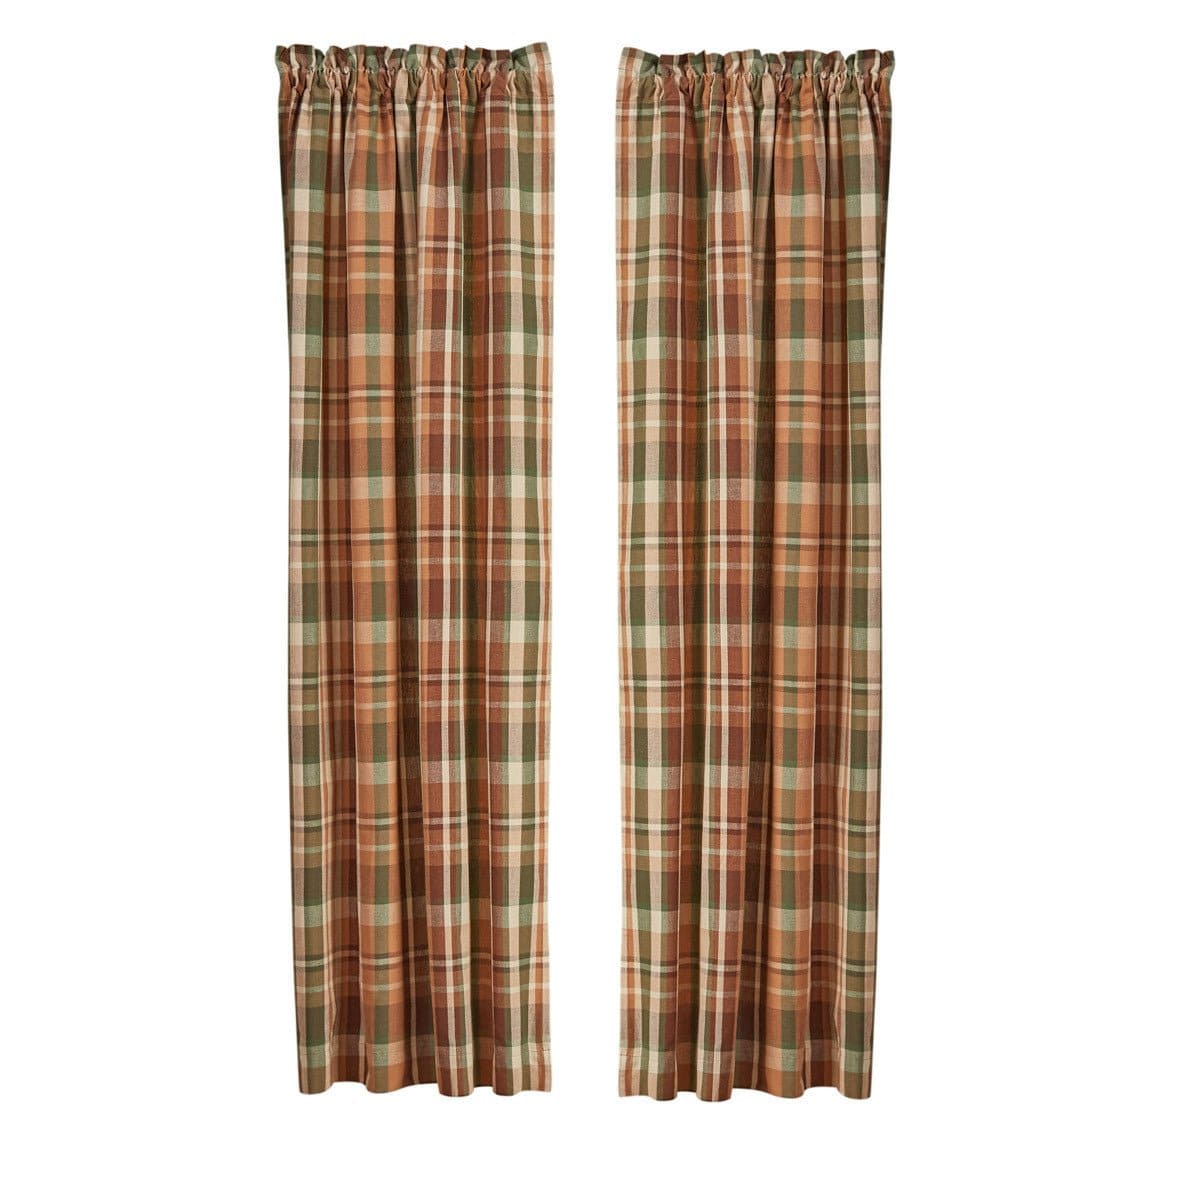 Woodbourne Panel Pair With Tie Backs 84" Long Lined-Park Designs-The Village Merchant